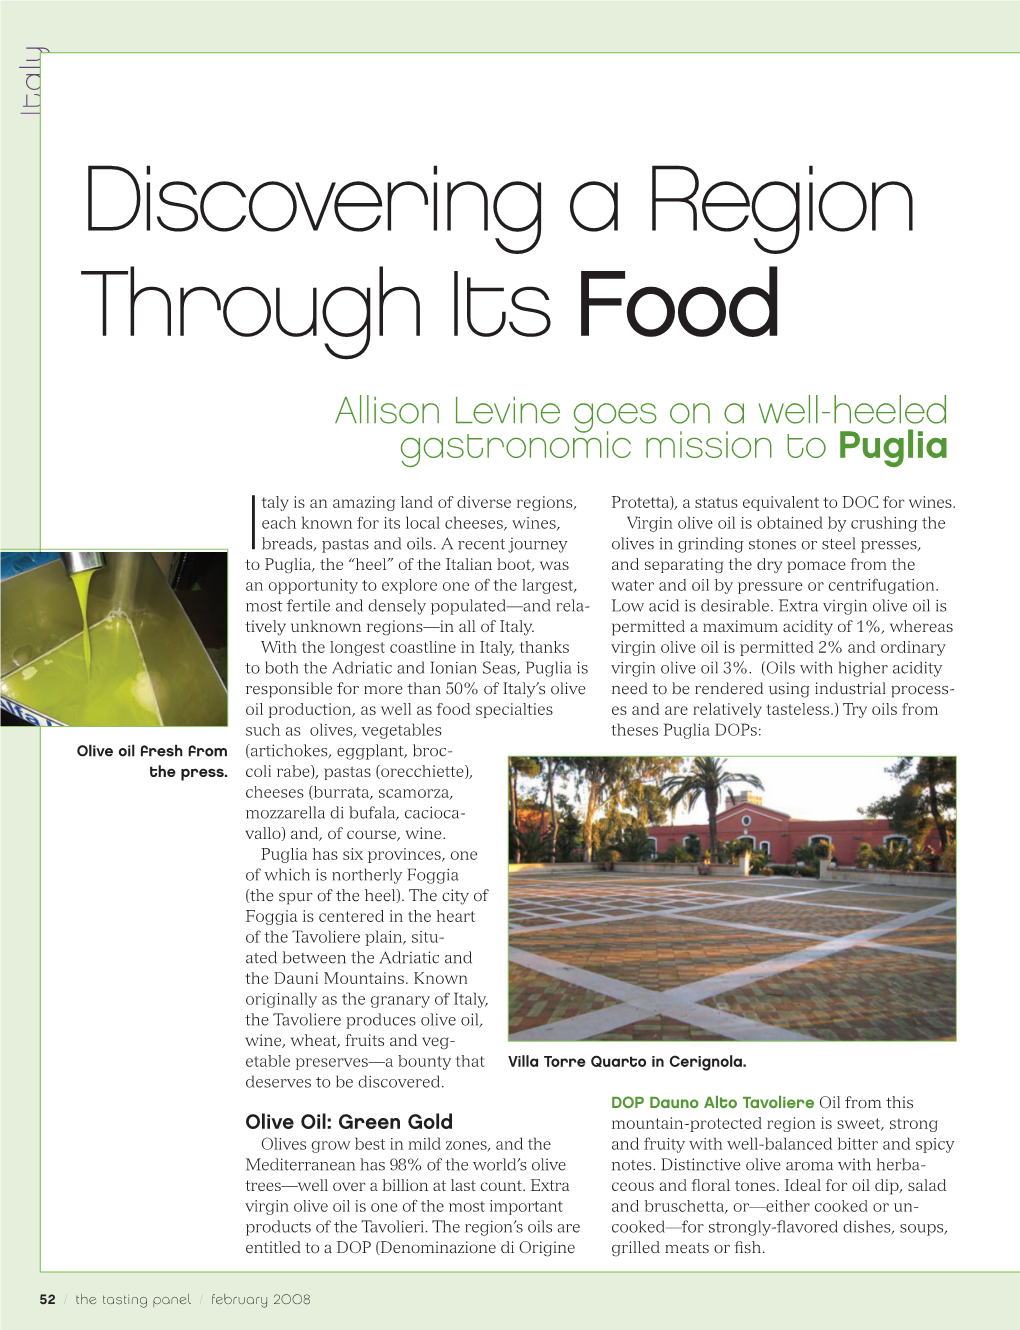 Discovering a Region Through Its Food